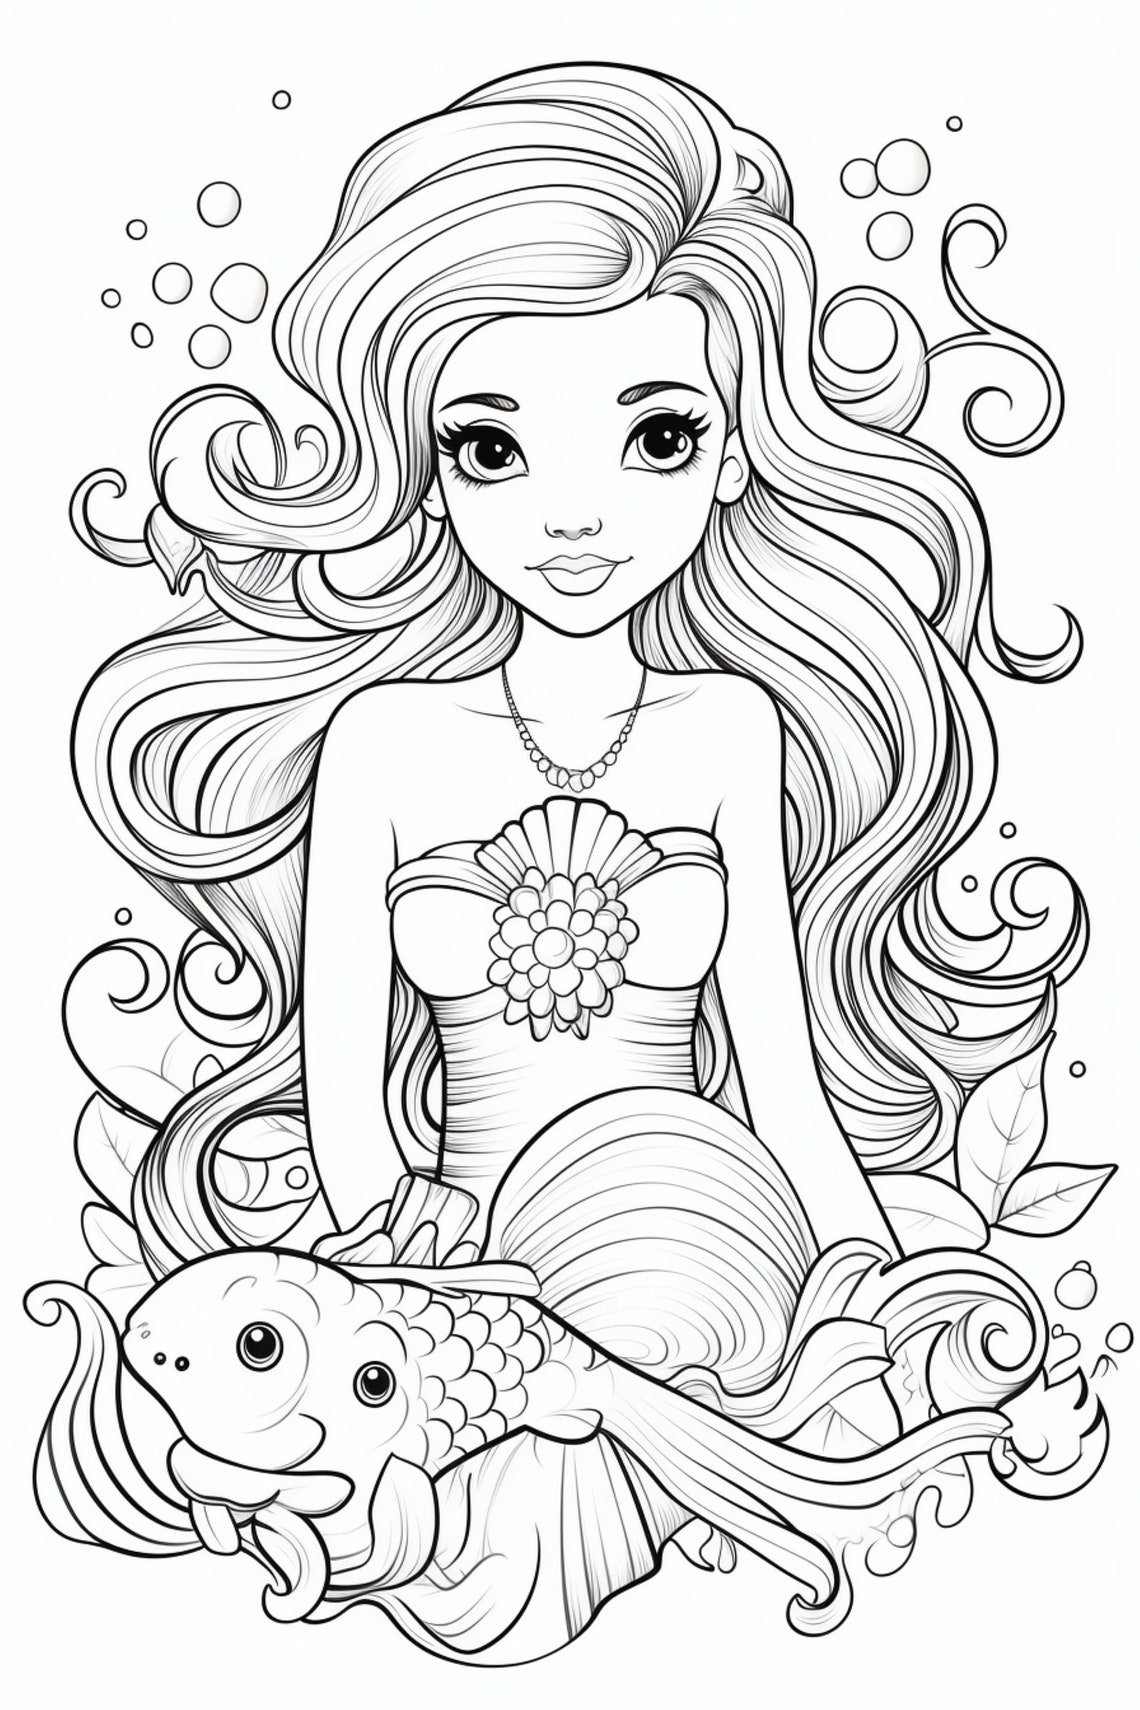 Mermaid 5 Coloring Pages 5 - Etsy